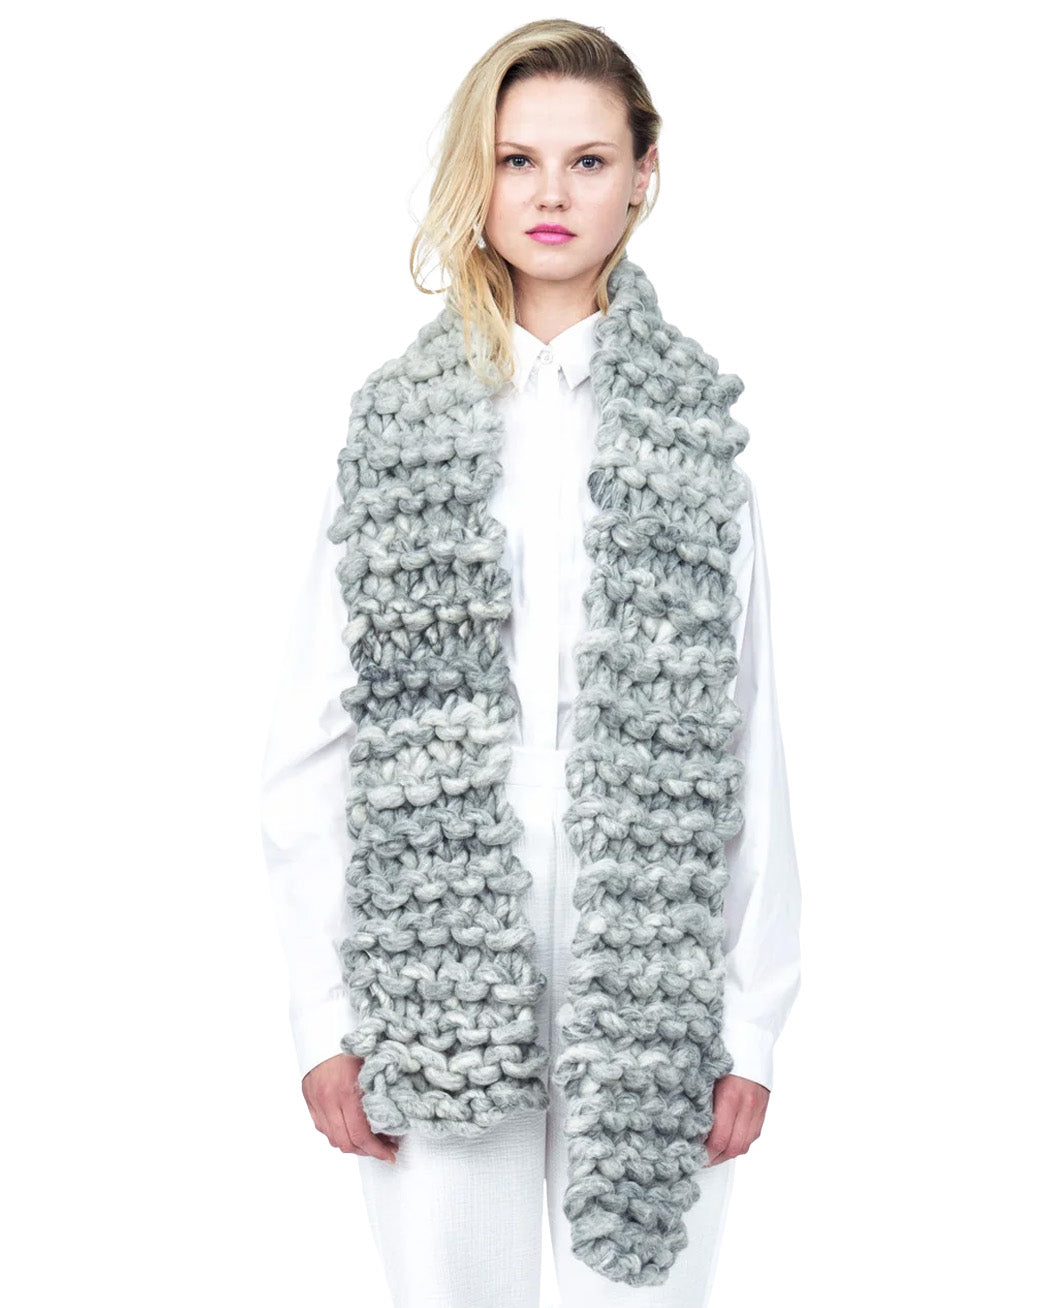 READY TO SHIP READYMADE CLEARANCE SALE!! - New Yorker Scarf - Merino